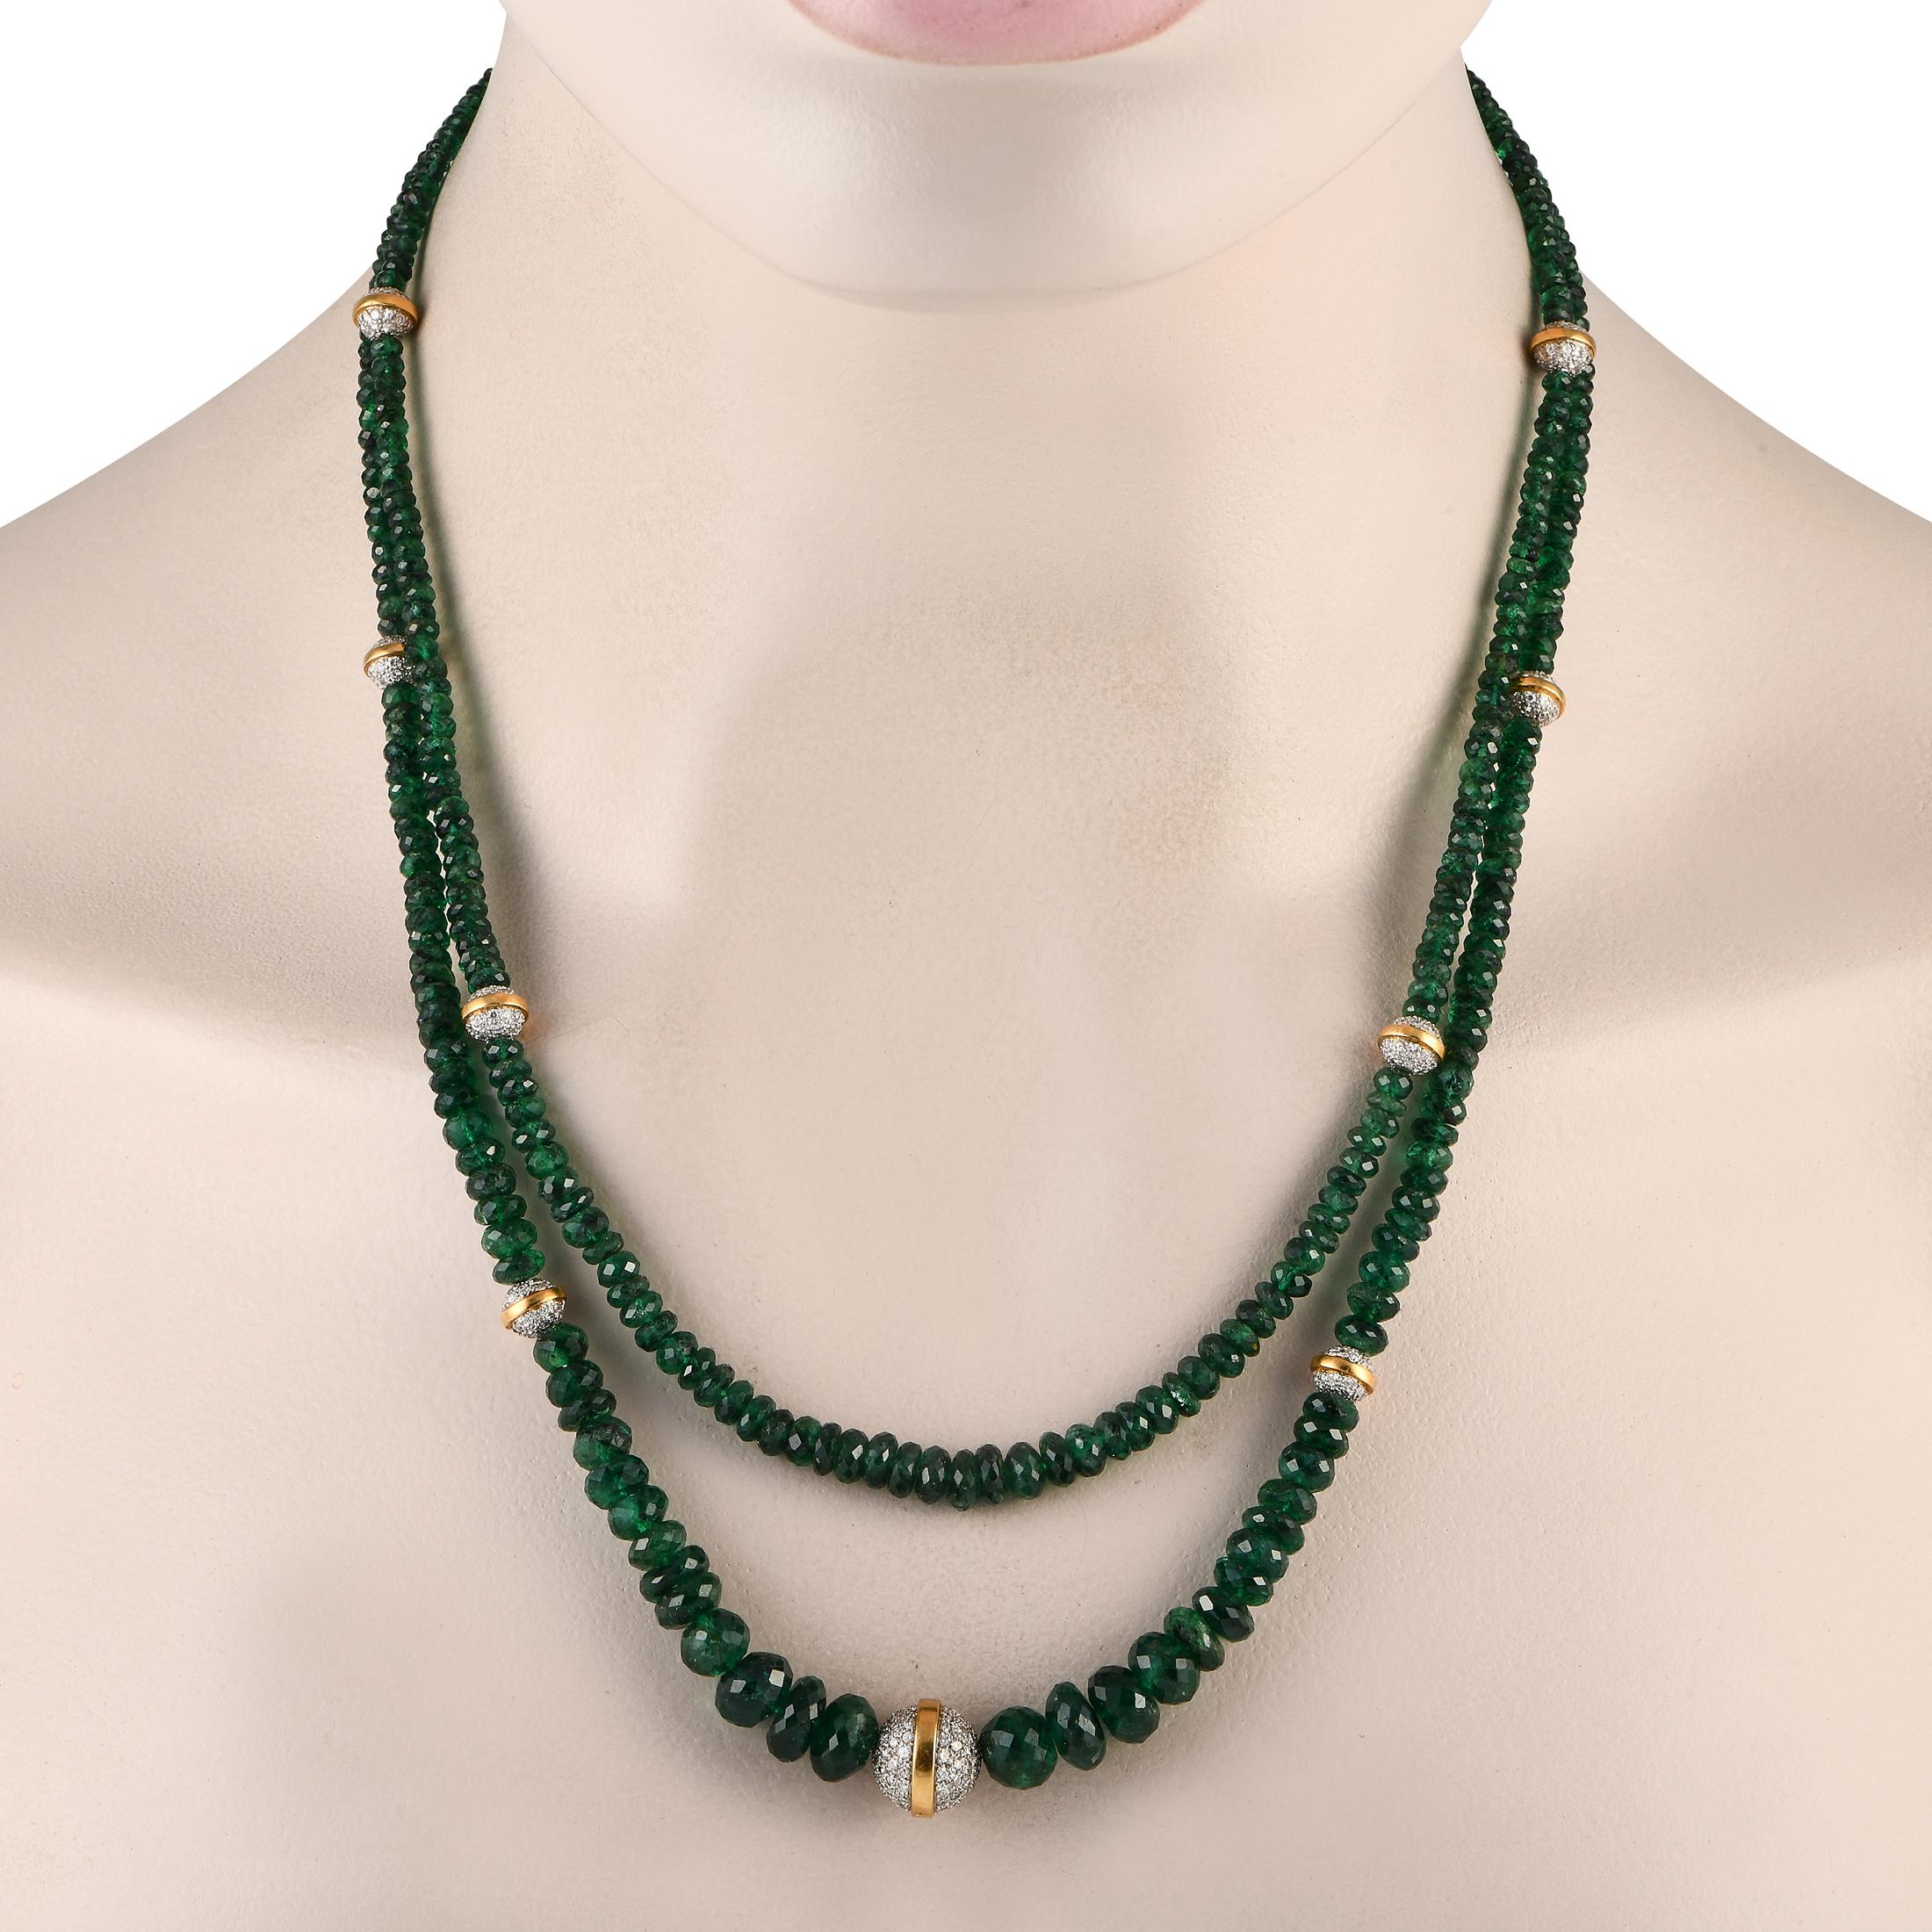 Emerald gemstones with a total weight of 185.0 carats make this necklace endlessly impressive. On this multi-layered piece  which measures 20 long  18K Yellow Gold orbs accented by sparkling Diamonds with a total weight of 3.54 carats add extra